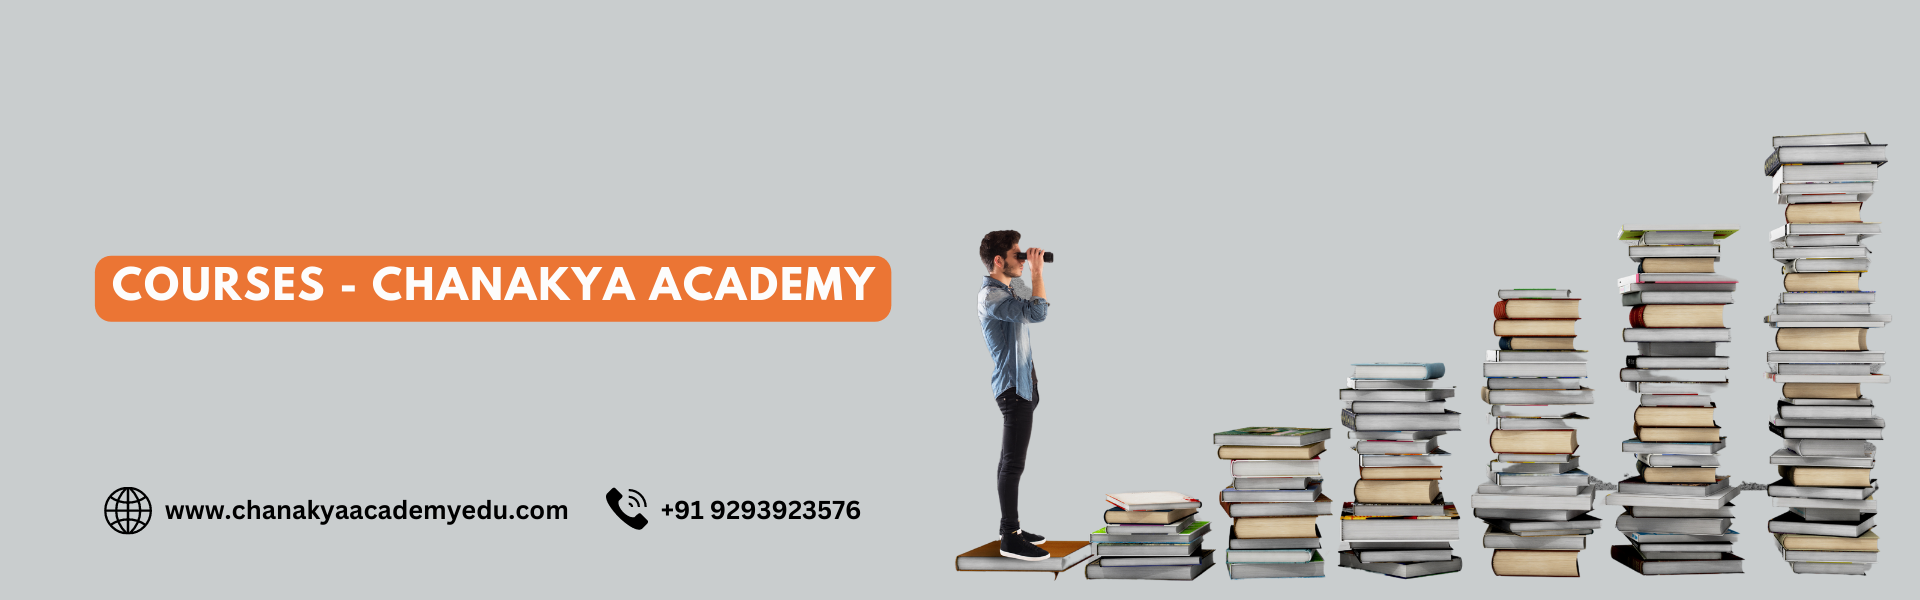 Chanakya Academy Offered Courses